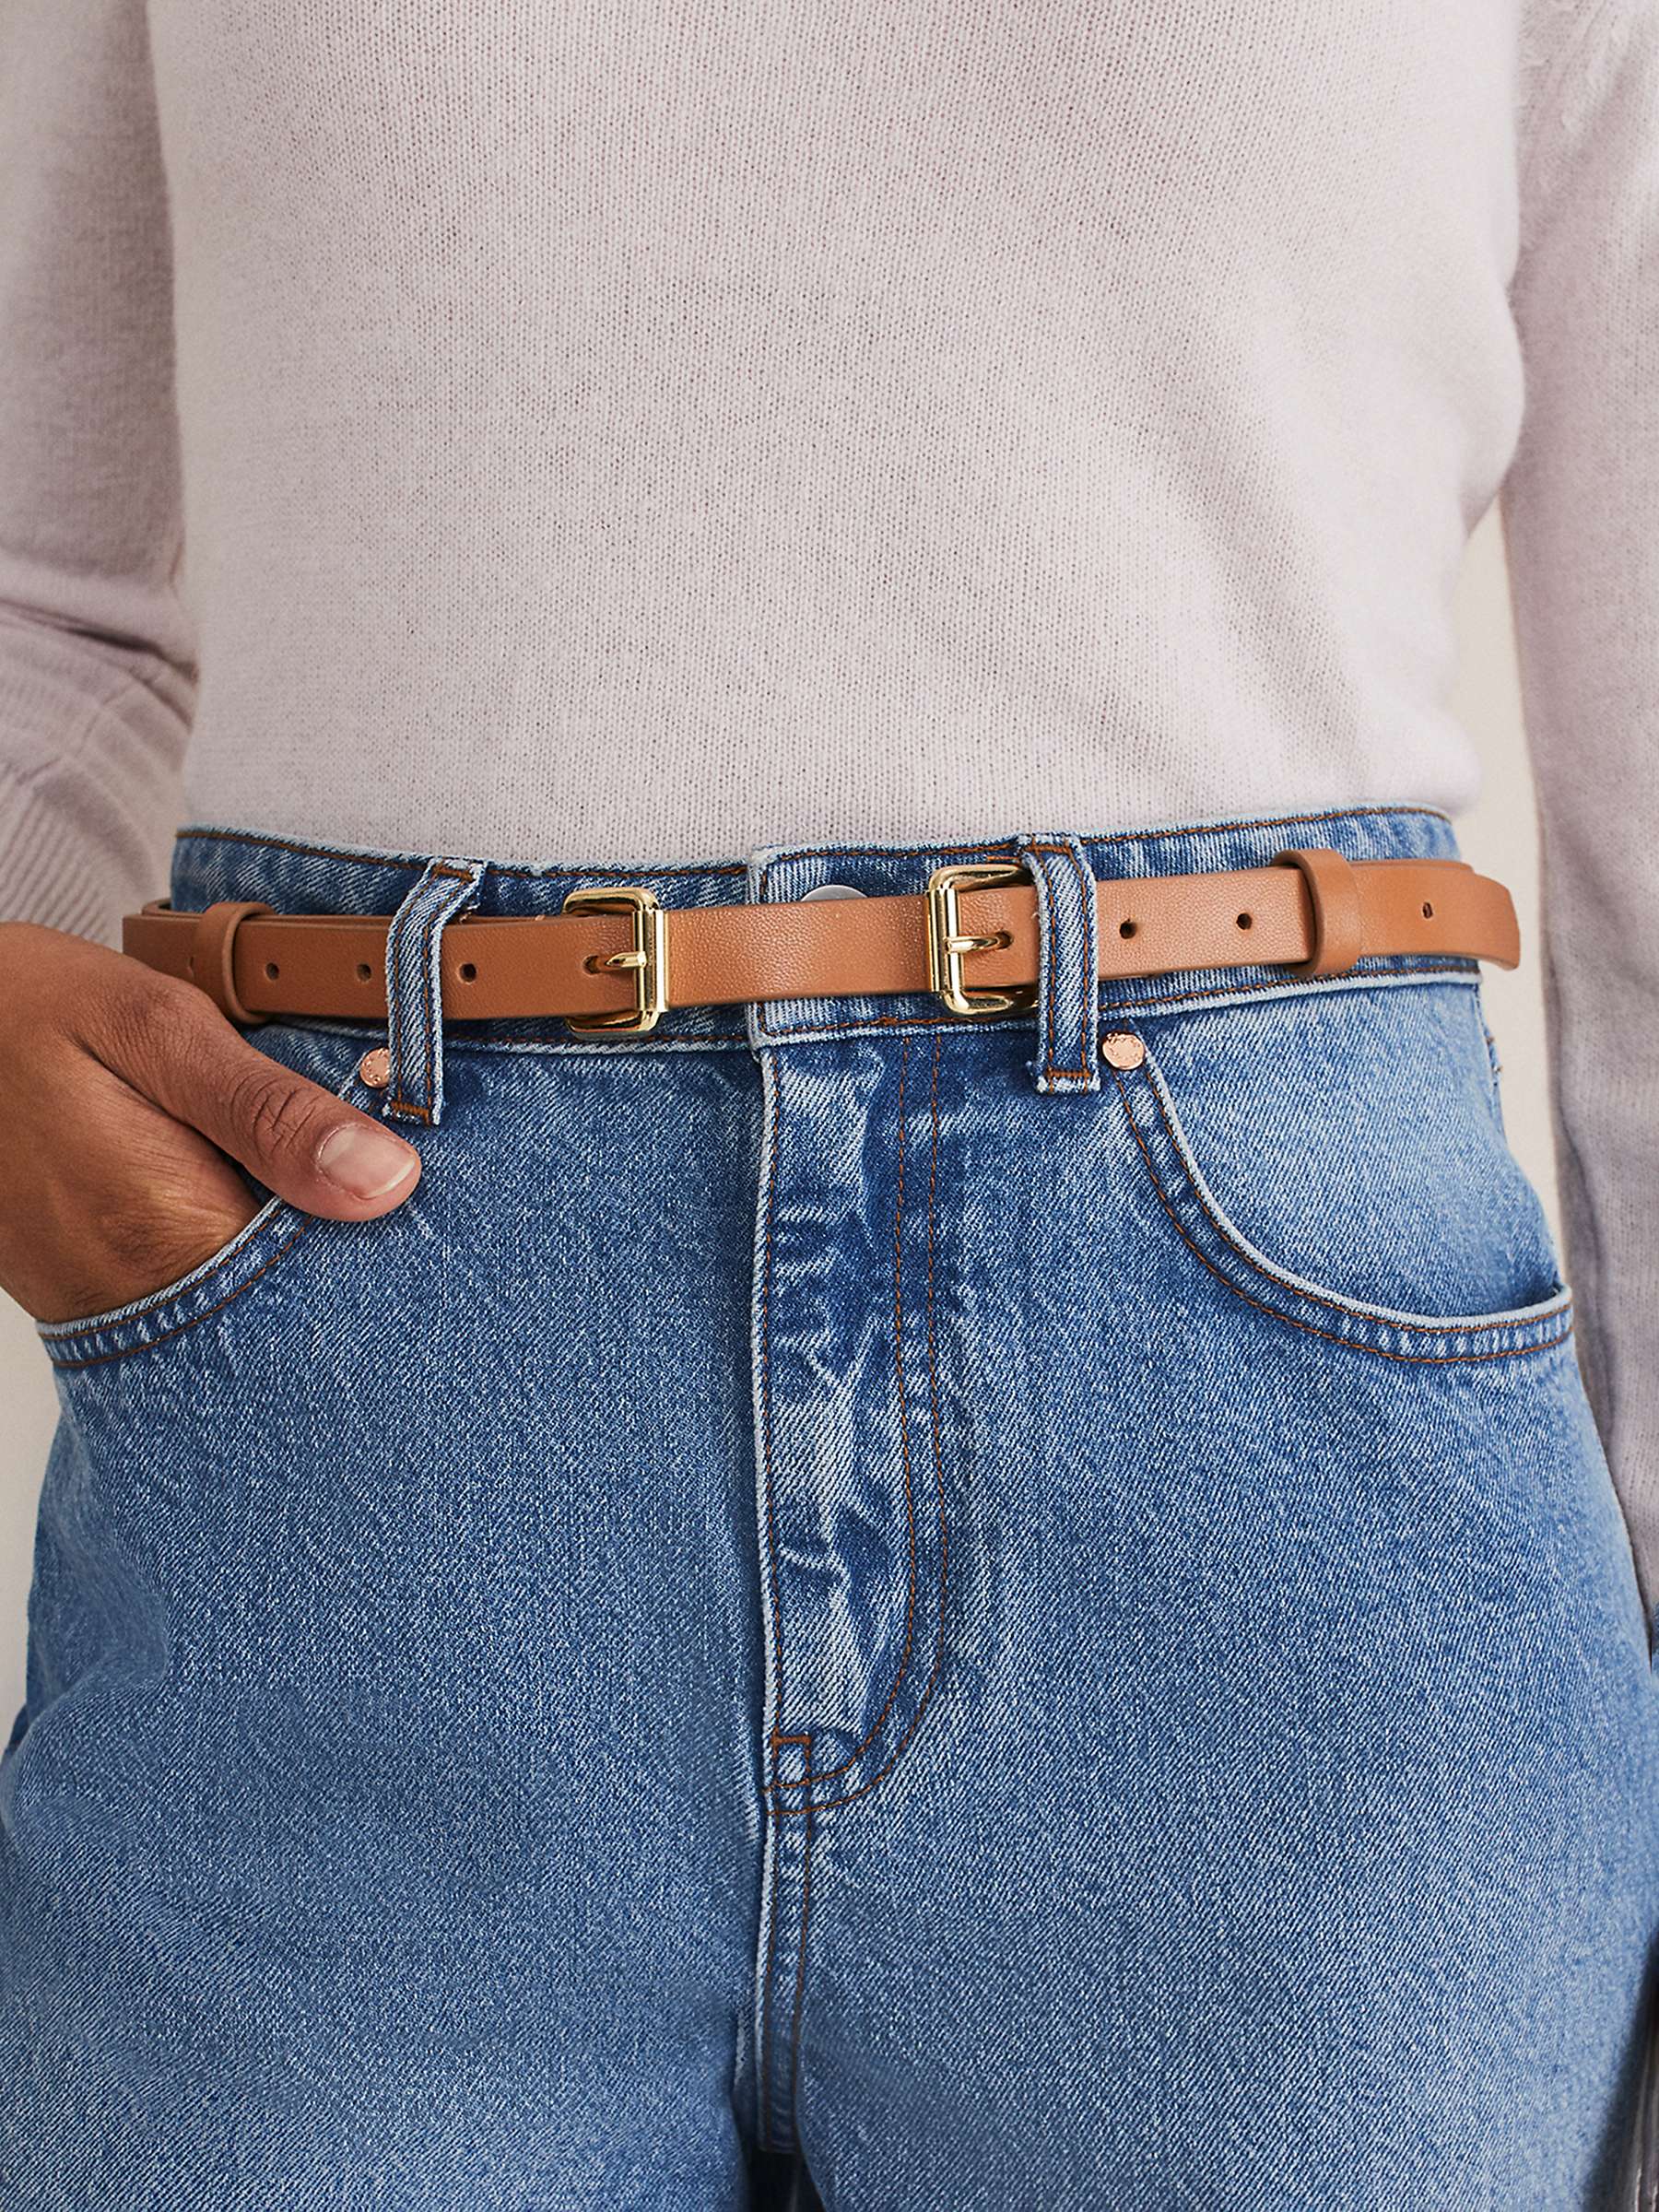 Buy Phase Eight Double Buckle Slim Leather Belt, Tan Online at johnlewis.com